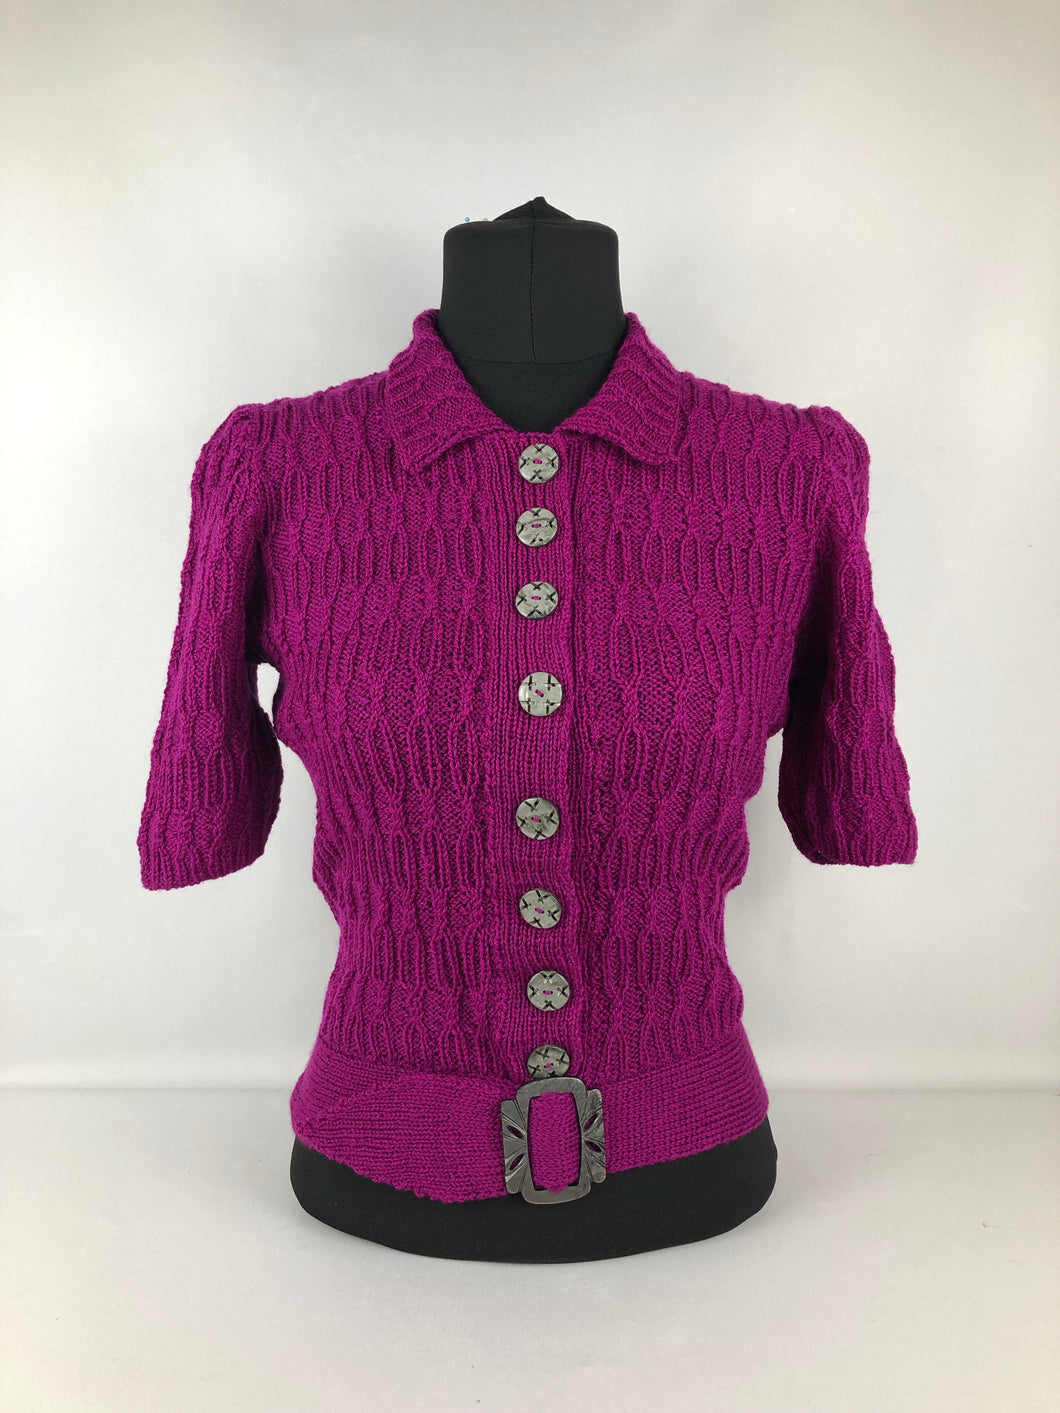 1940s Reproduction Handknitted Belted Cardigan with Collar from March 1941 - Bust 36 37 38 39 40